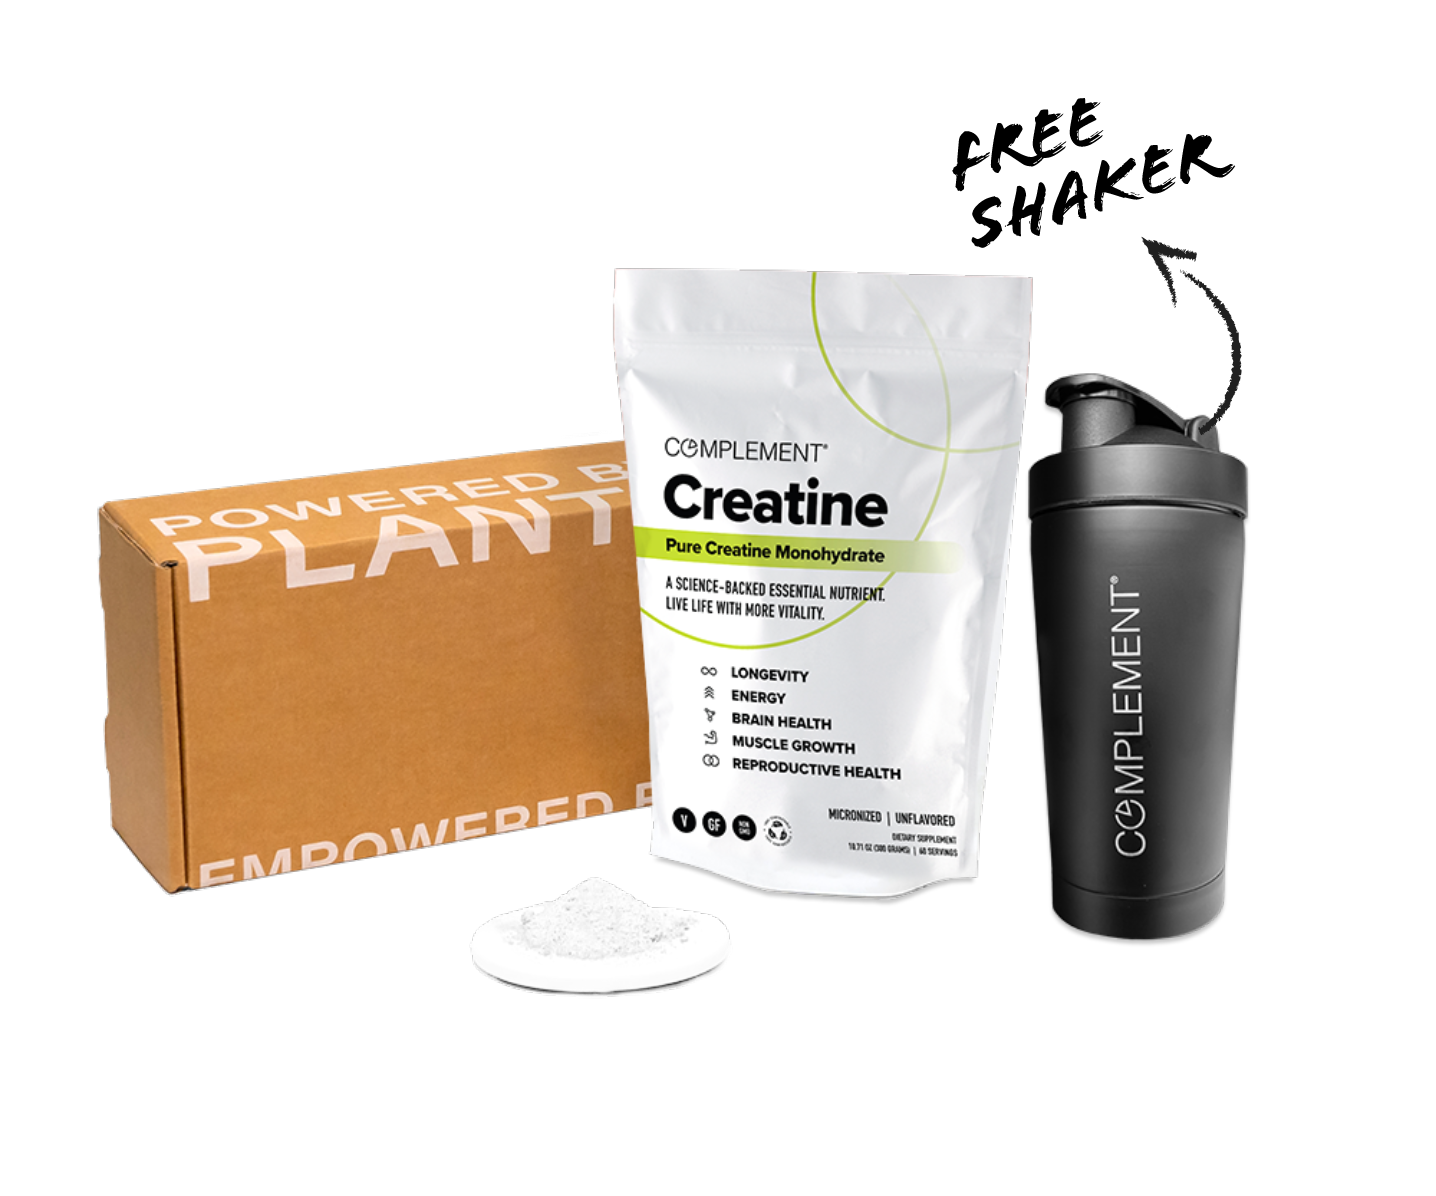 Container of Complement Creatine Monohydrate supplement for energy and muscle growth.